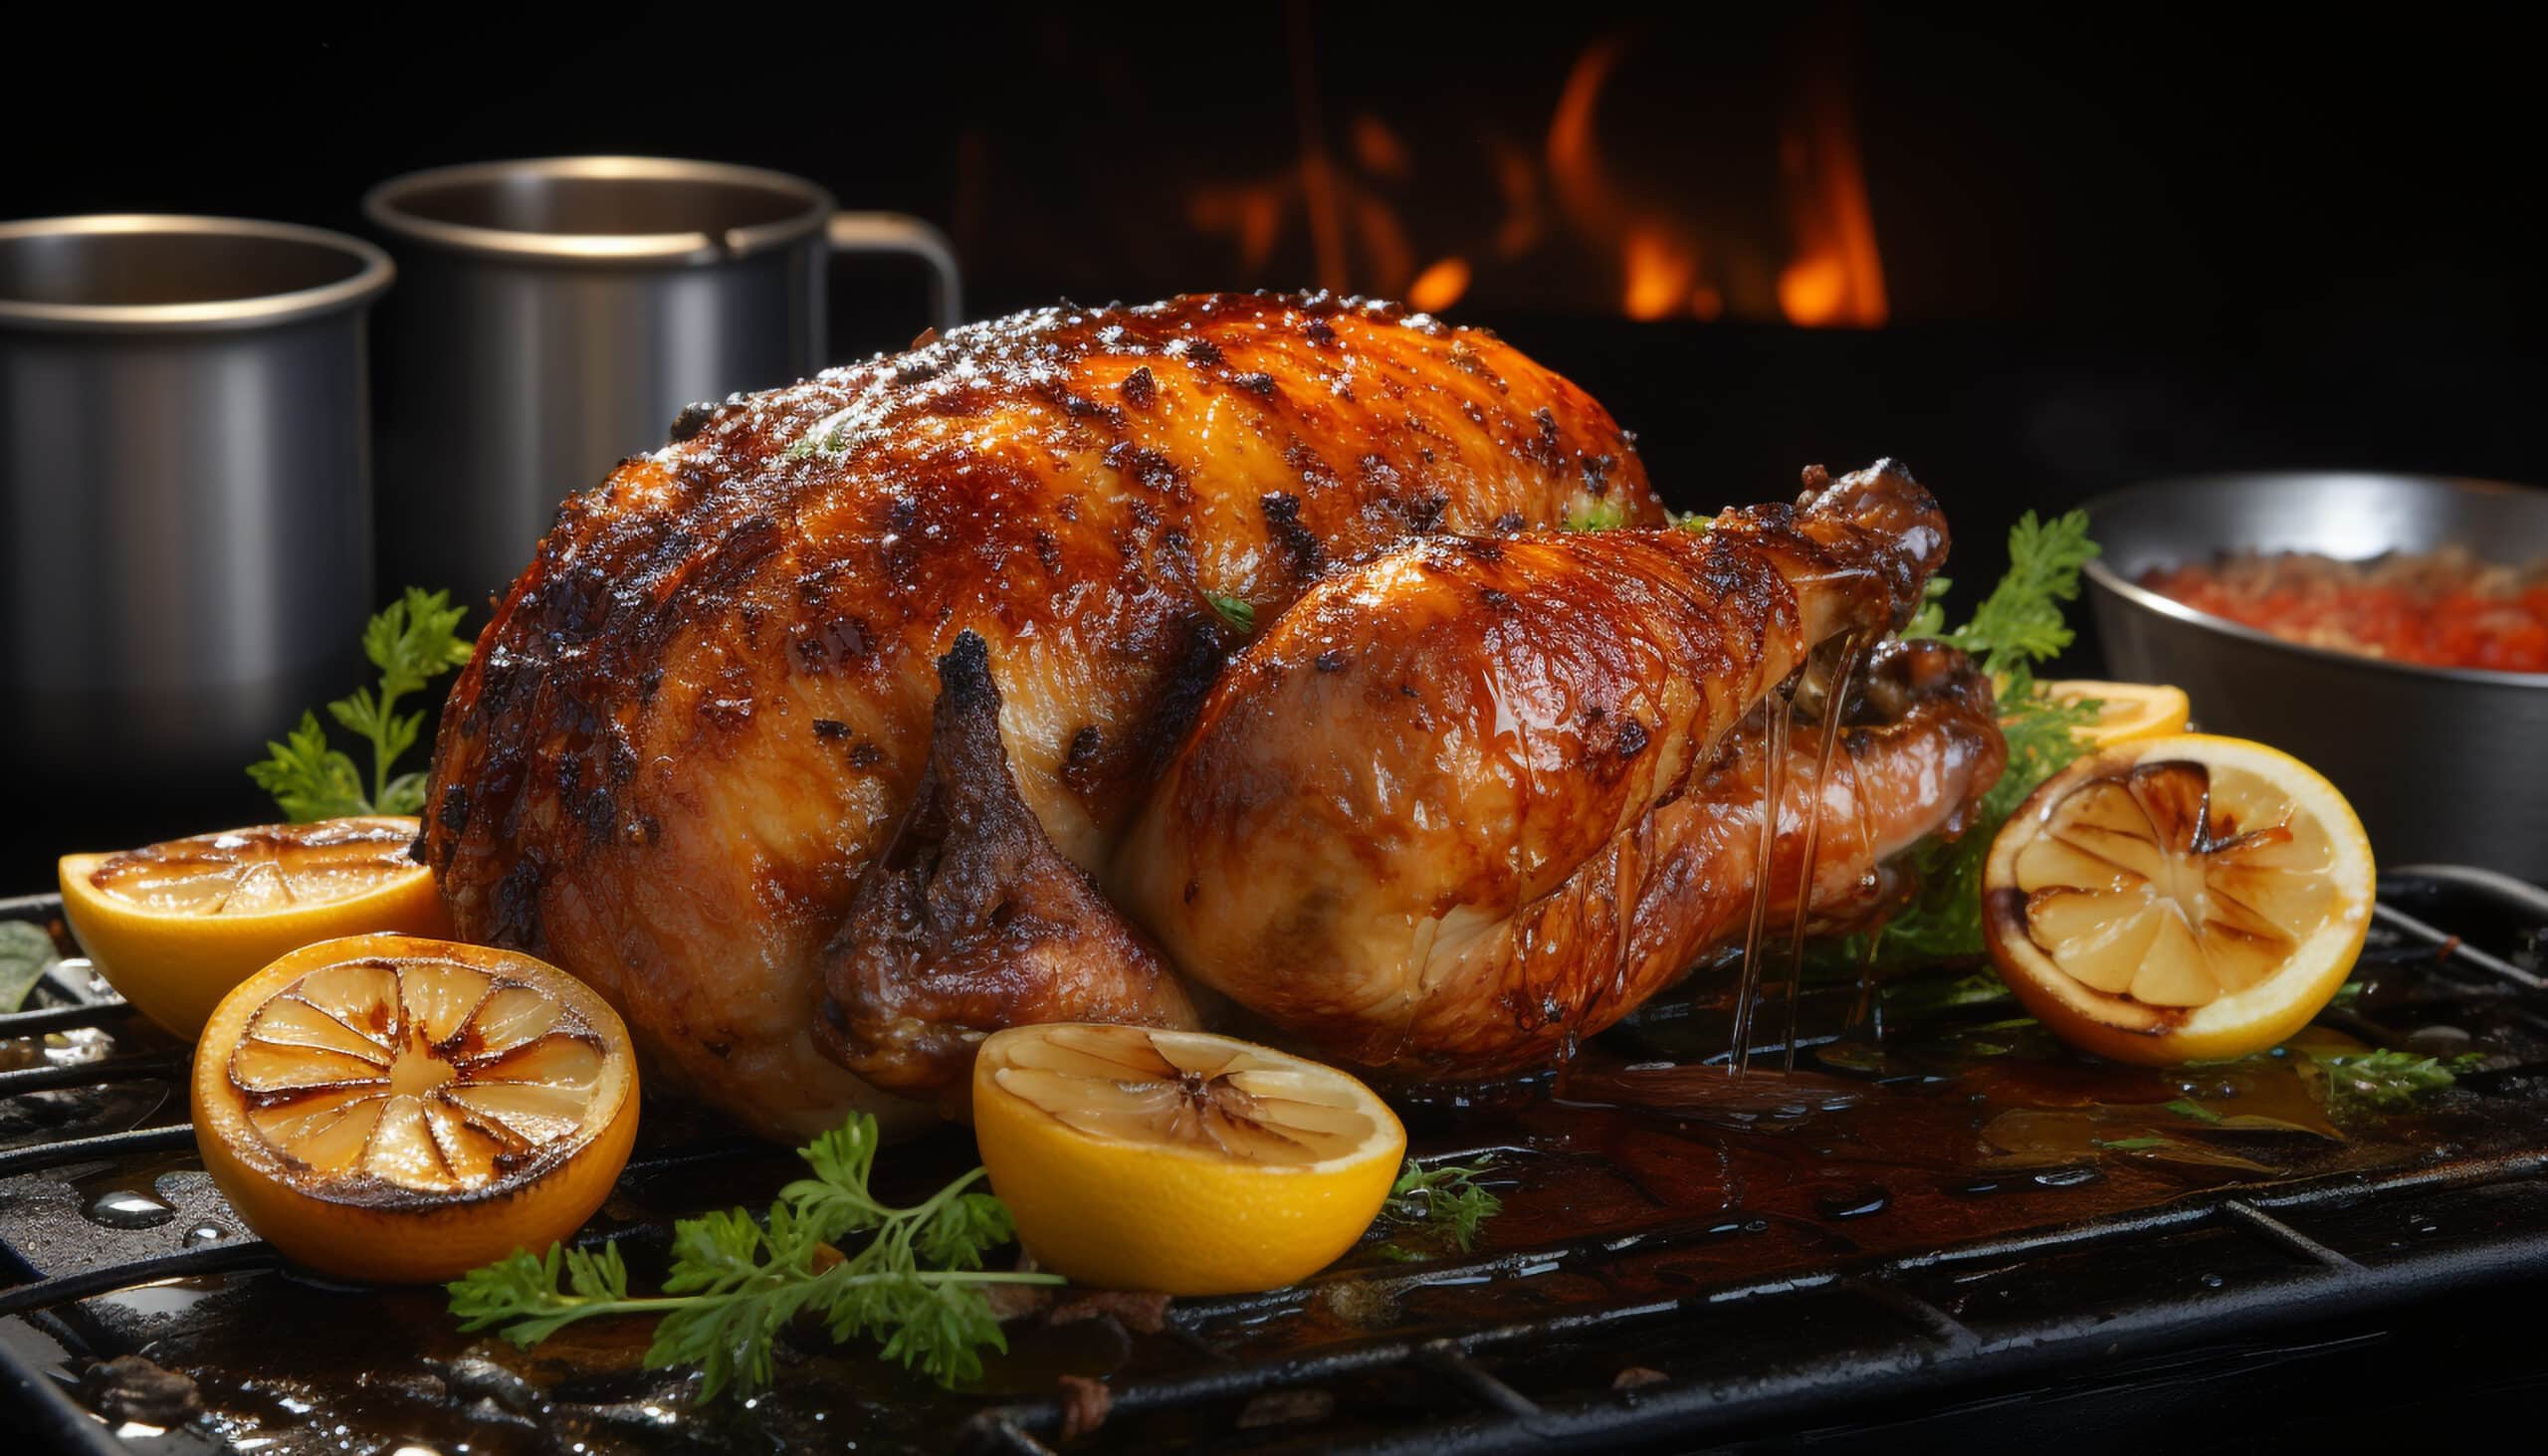 www.appr.com : What Temp To Smoke Whole Chicken On Pellet Grill?